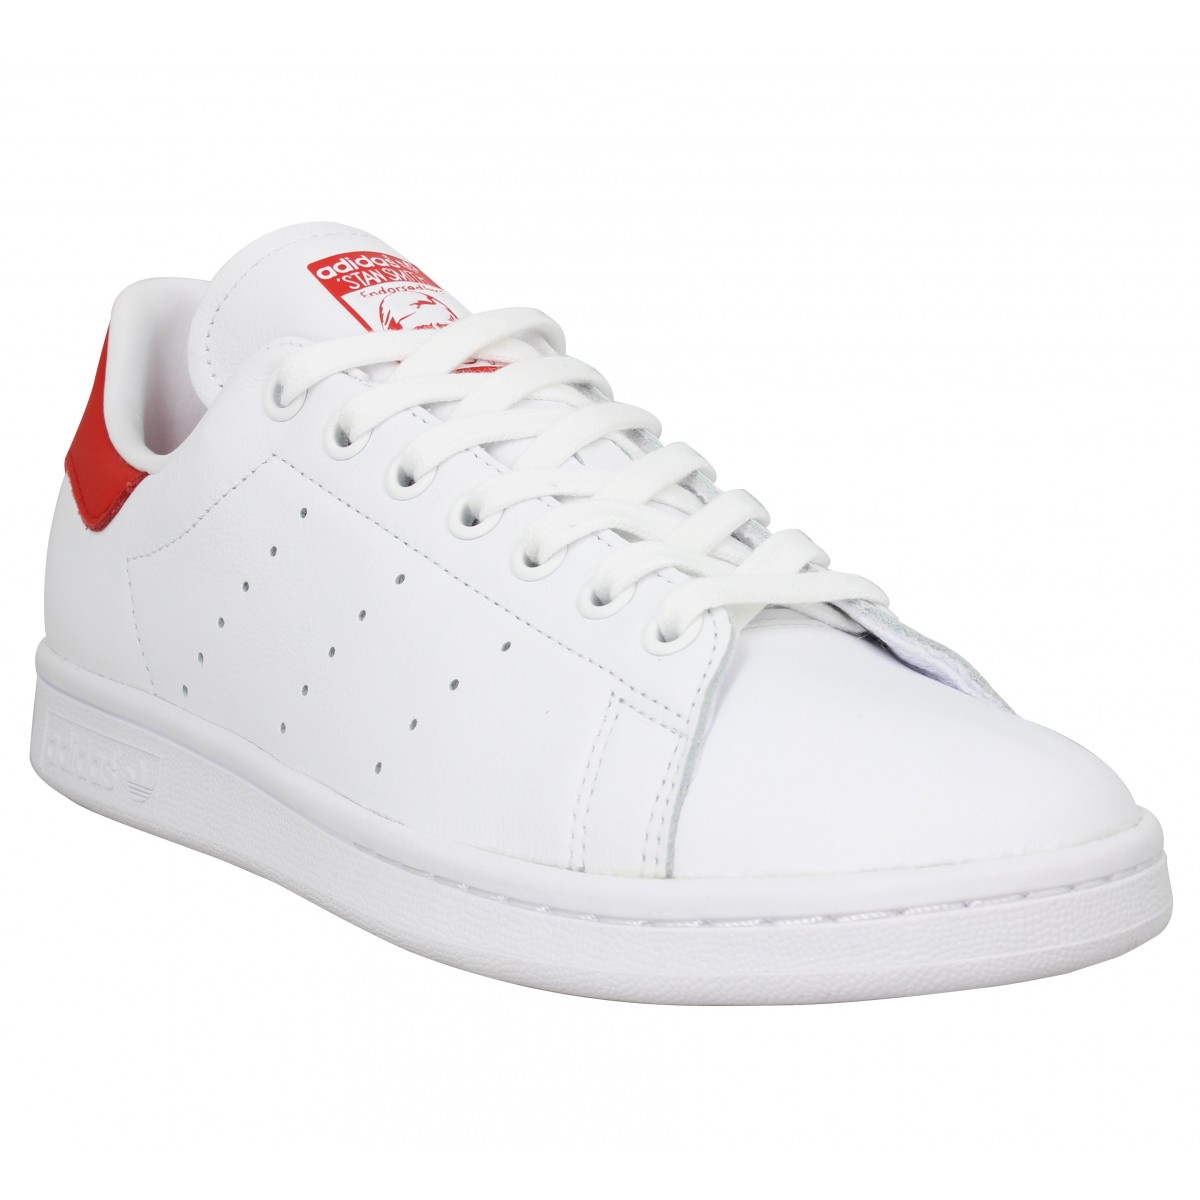 chaussure adidas stan smith rouge